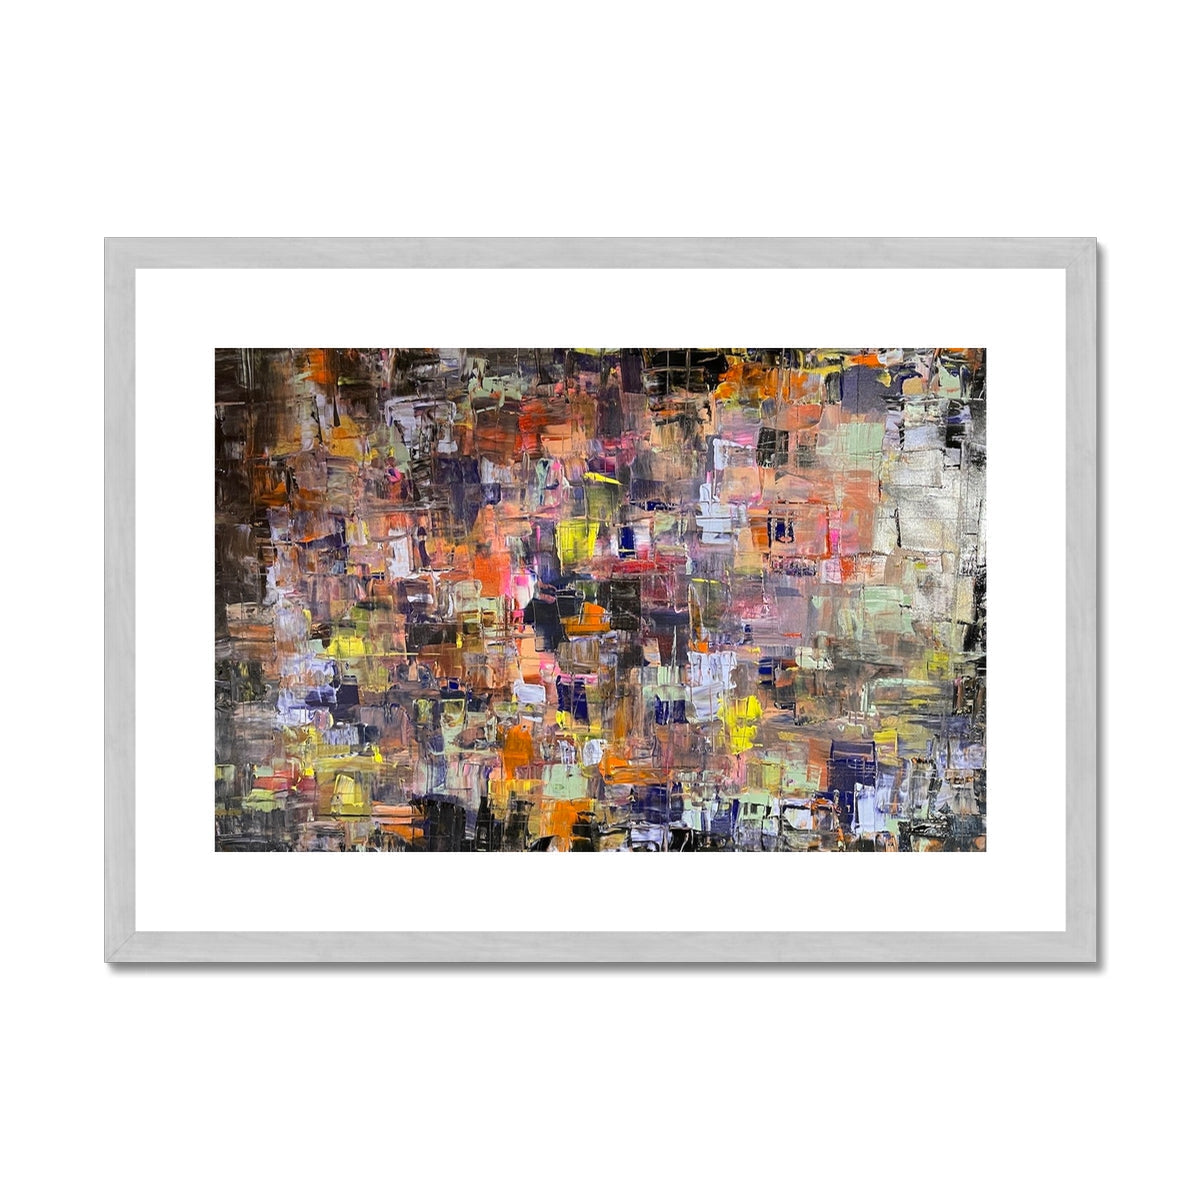 Never Enough Abstract Painting | Antique Framed & Mounted Prints From Scotland-Antique Framed & Mounted Prints-Abstract & Impressionistic Art Gallery-A2 Landscape-Silver Frame-Paintings, Prints, Homeware, Art Gifts From Scotland By Scottish Artist Kevin Hunter